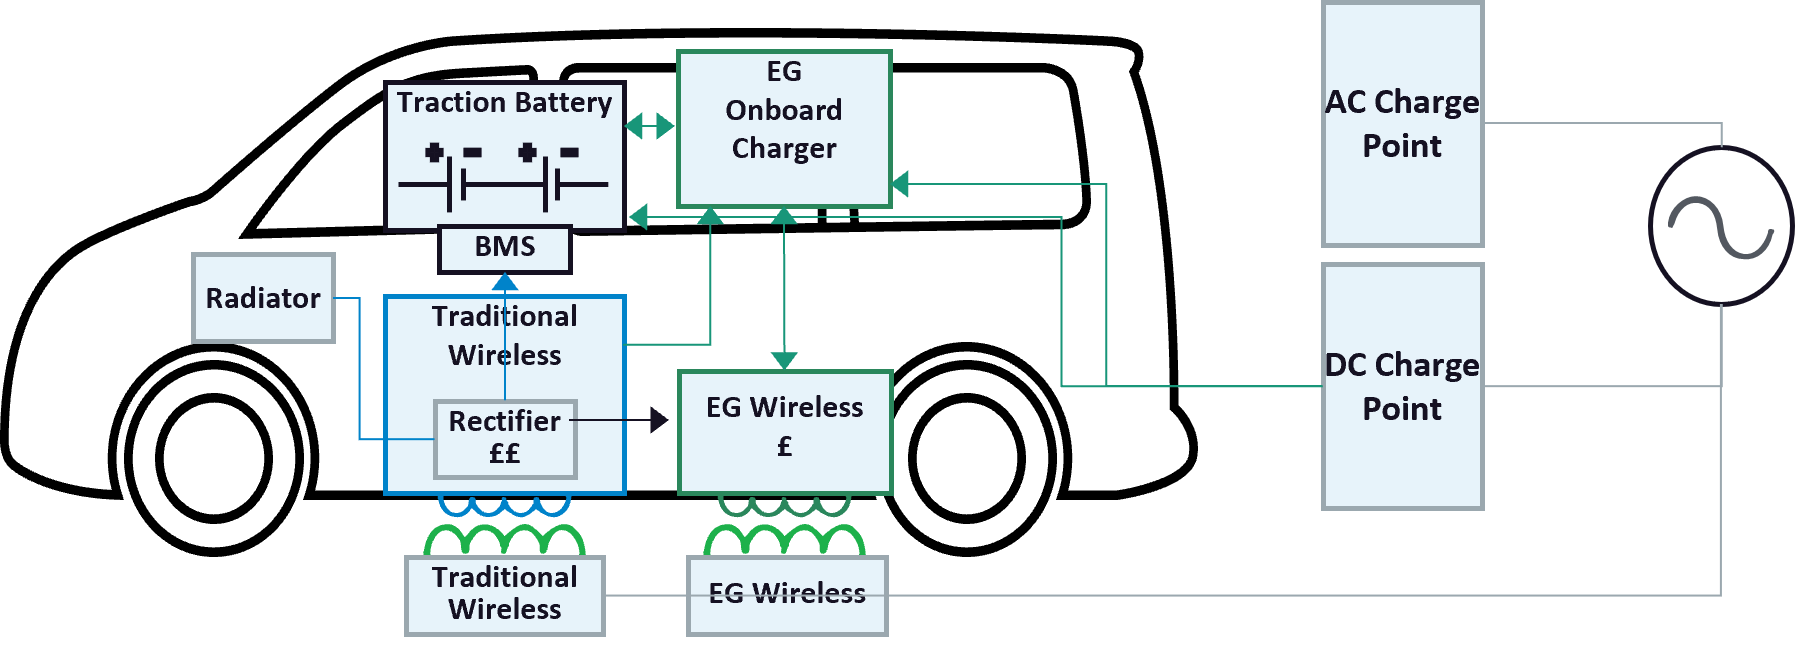 Diagram of Electric Green wireless power transfer system integration path into OEM vehicle.